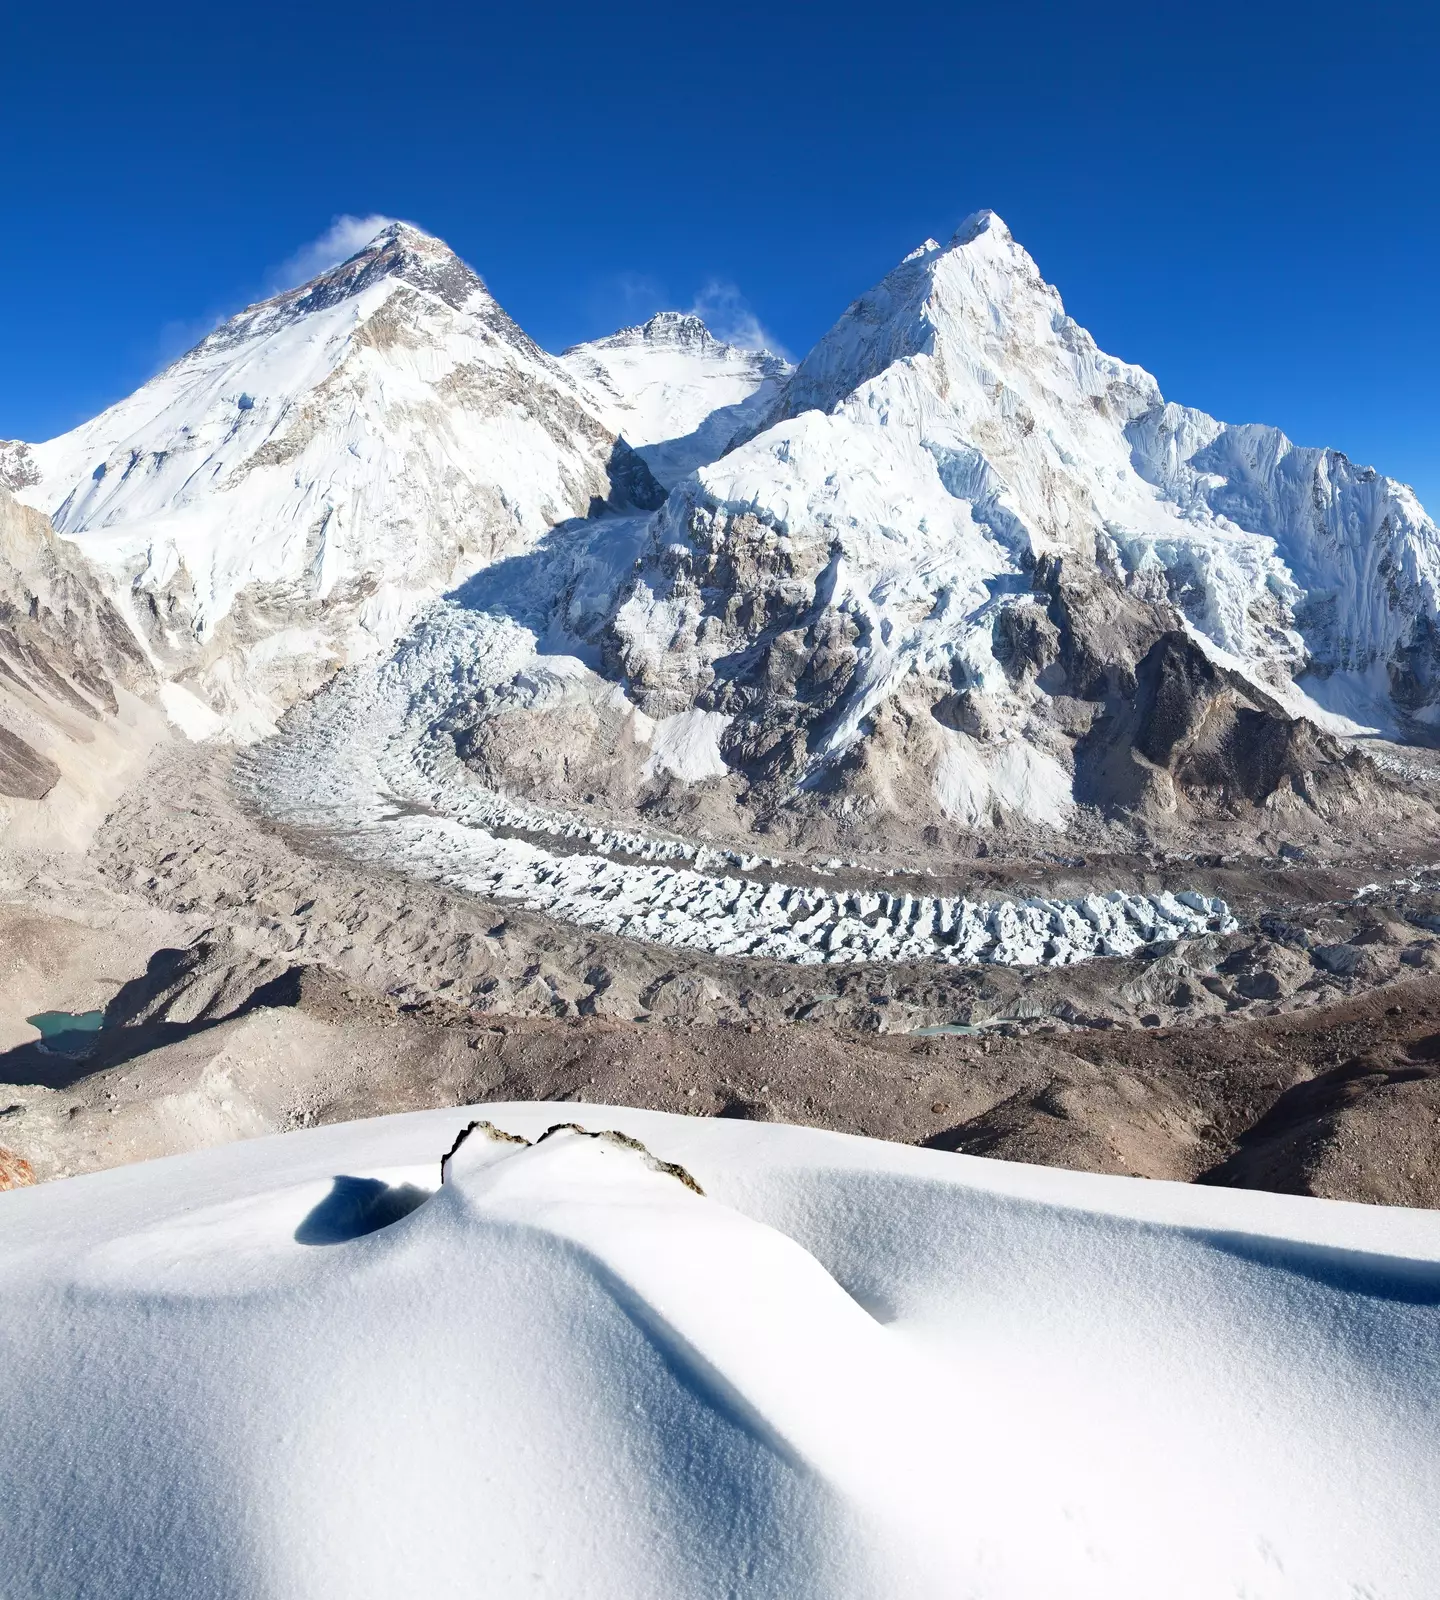 View of Mount Everest, Lhotse and Nuptse from Pumori base camp.